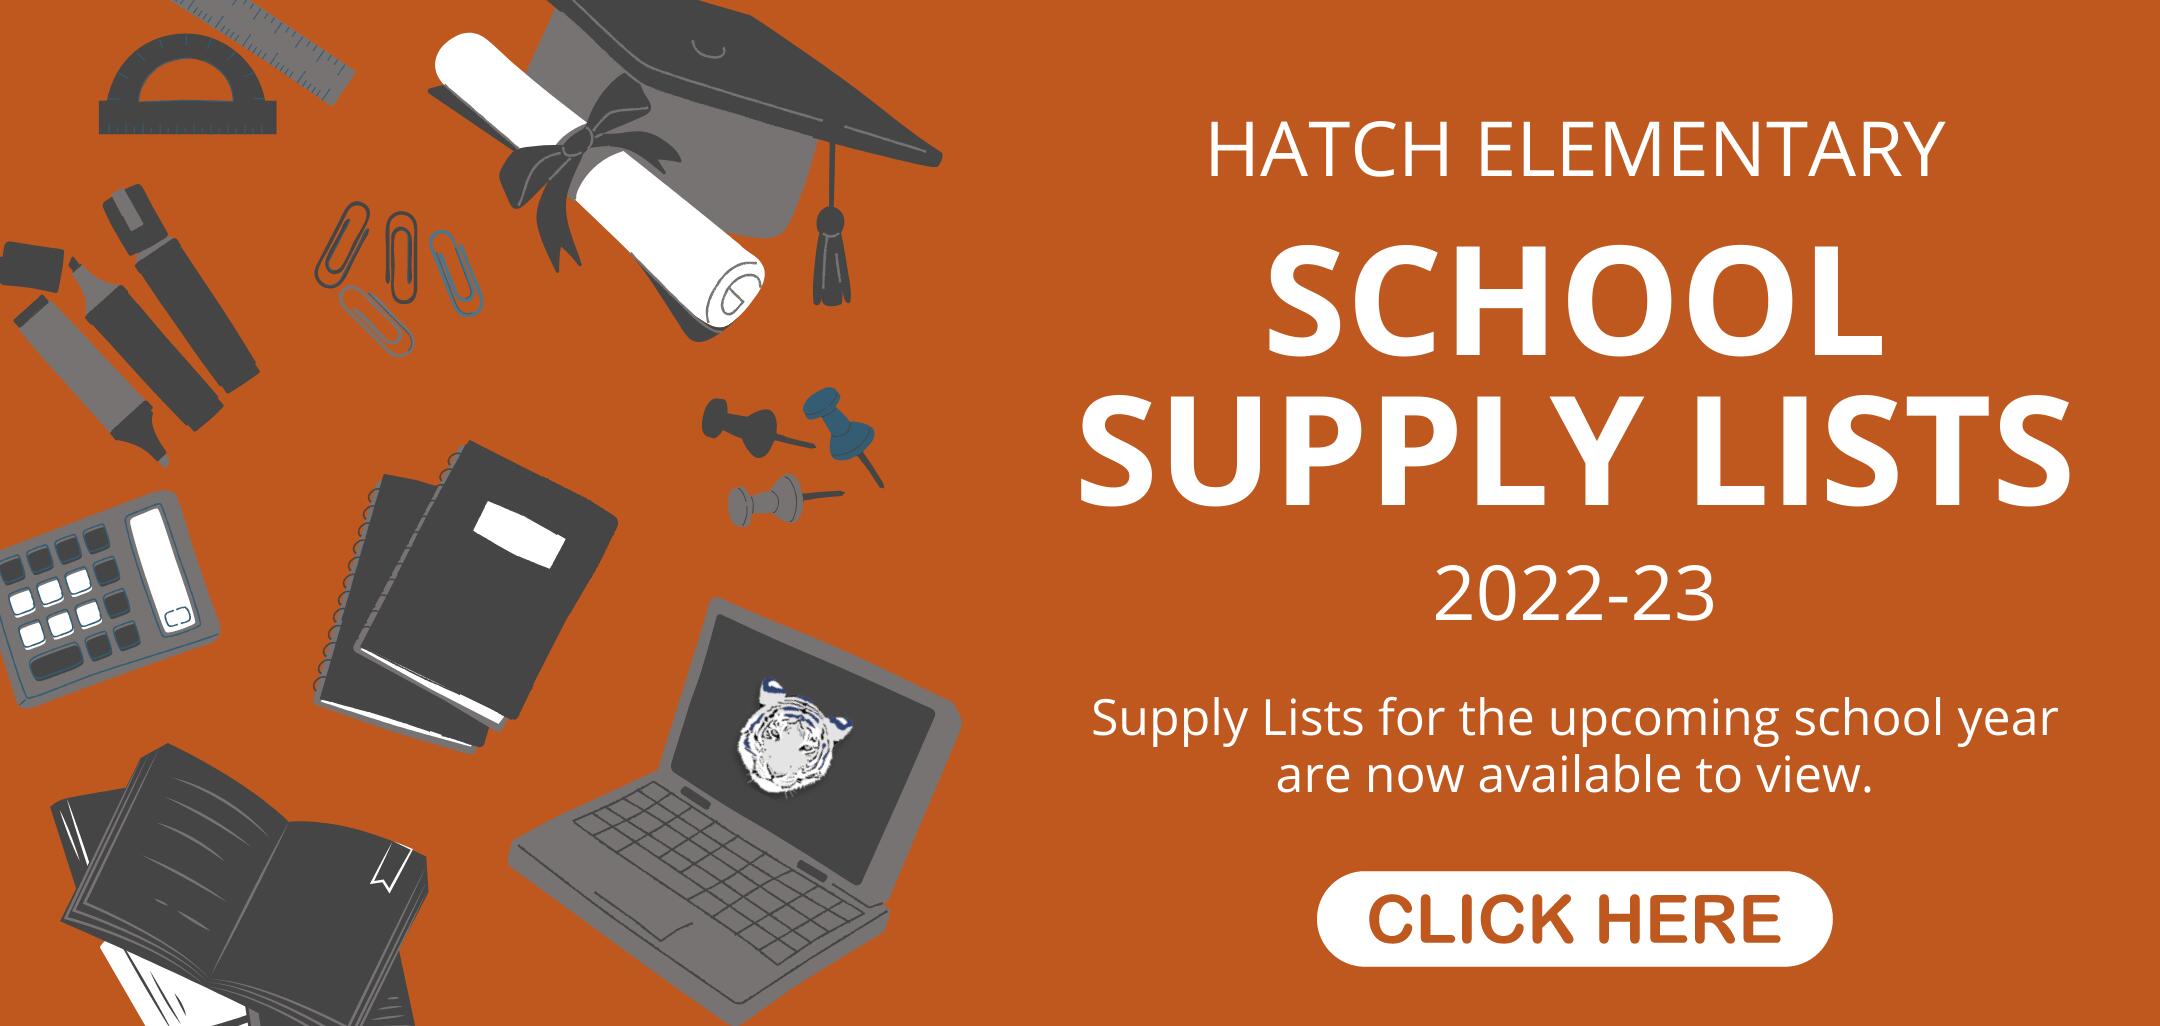 Click here to view the 2022-23 Hatch School Supply List